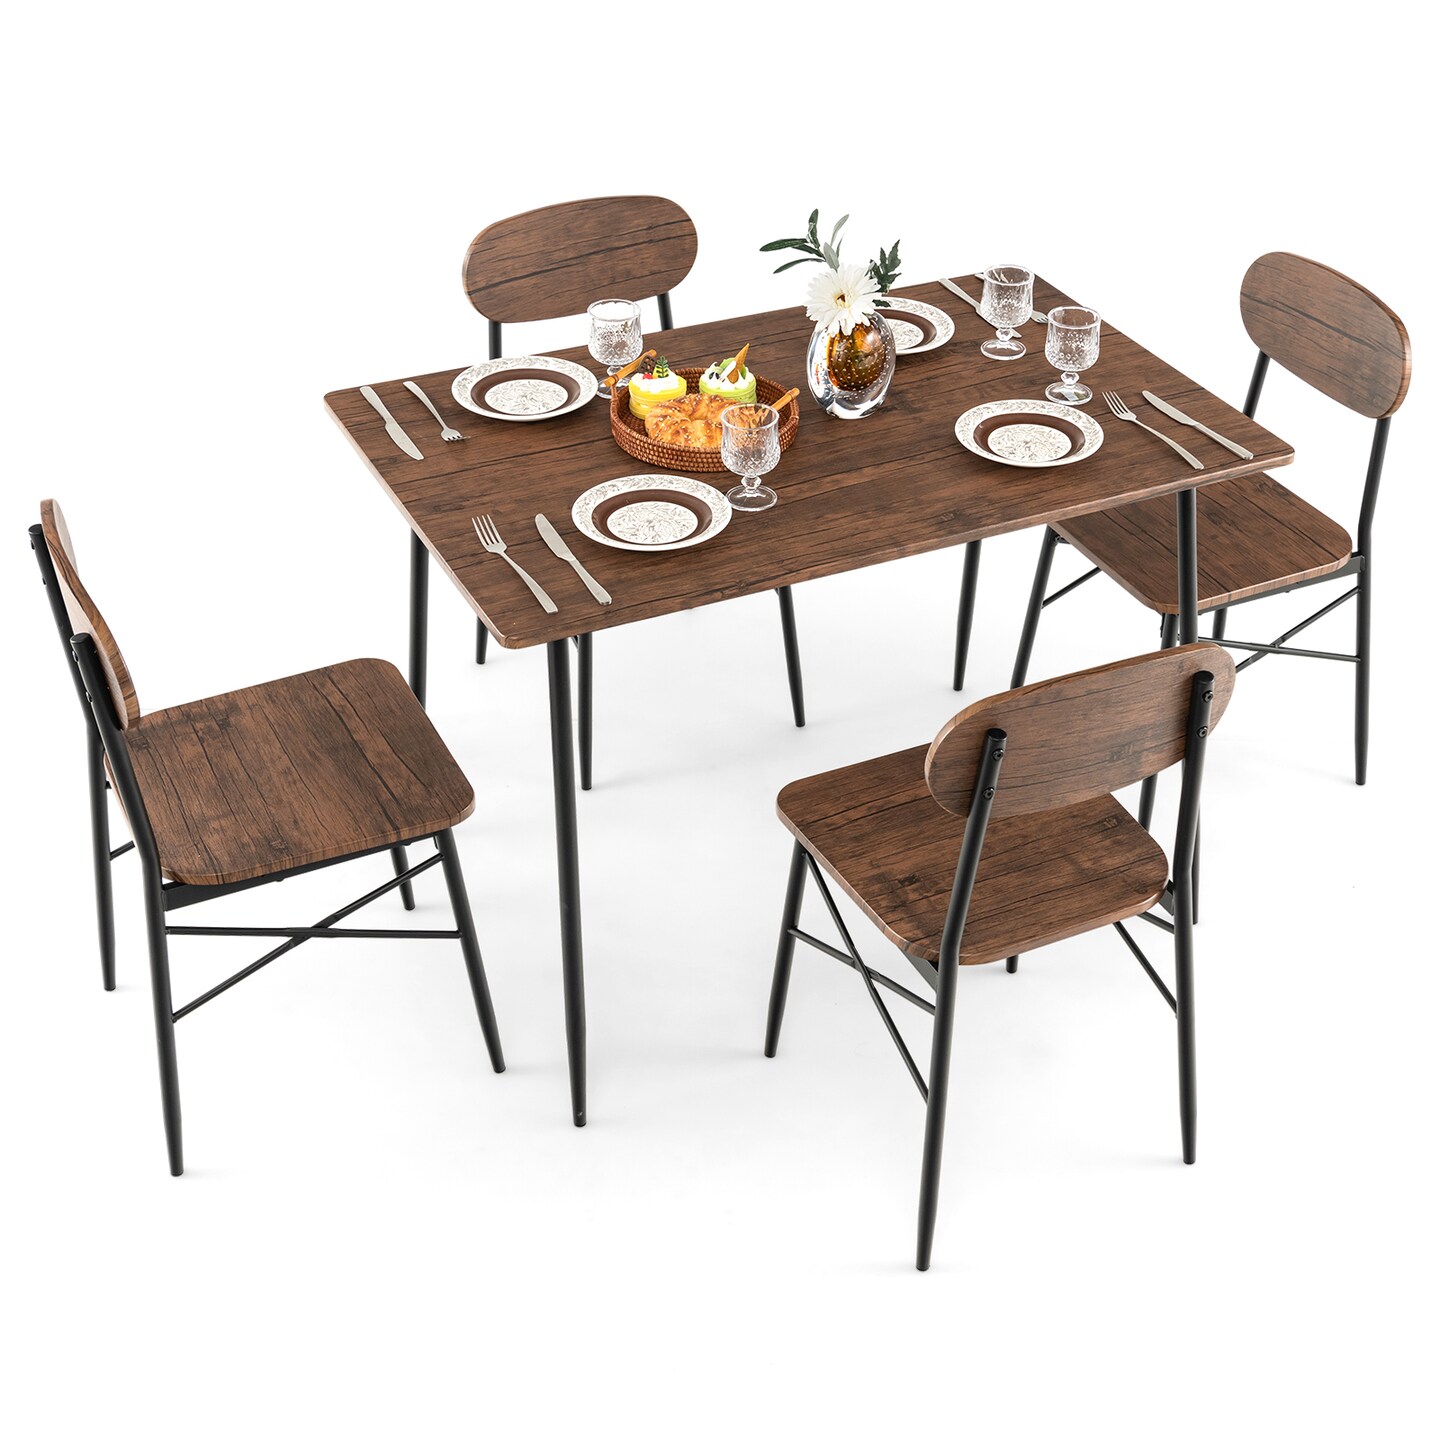 5 Piece Dining Table Set Rectangular With Backrest And Metal Legs For Breakfast Nook